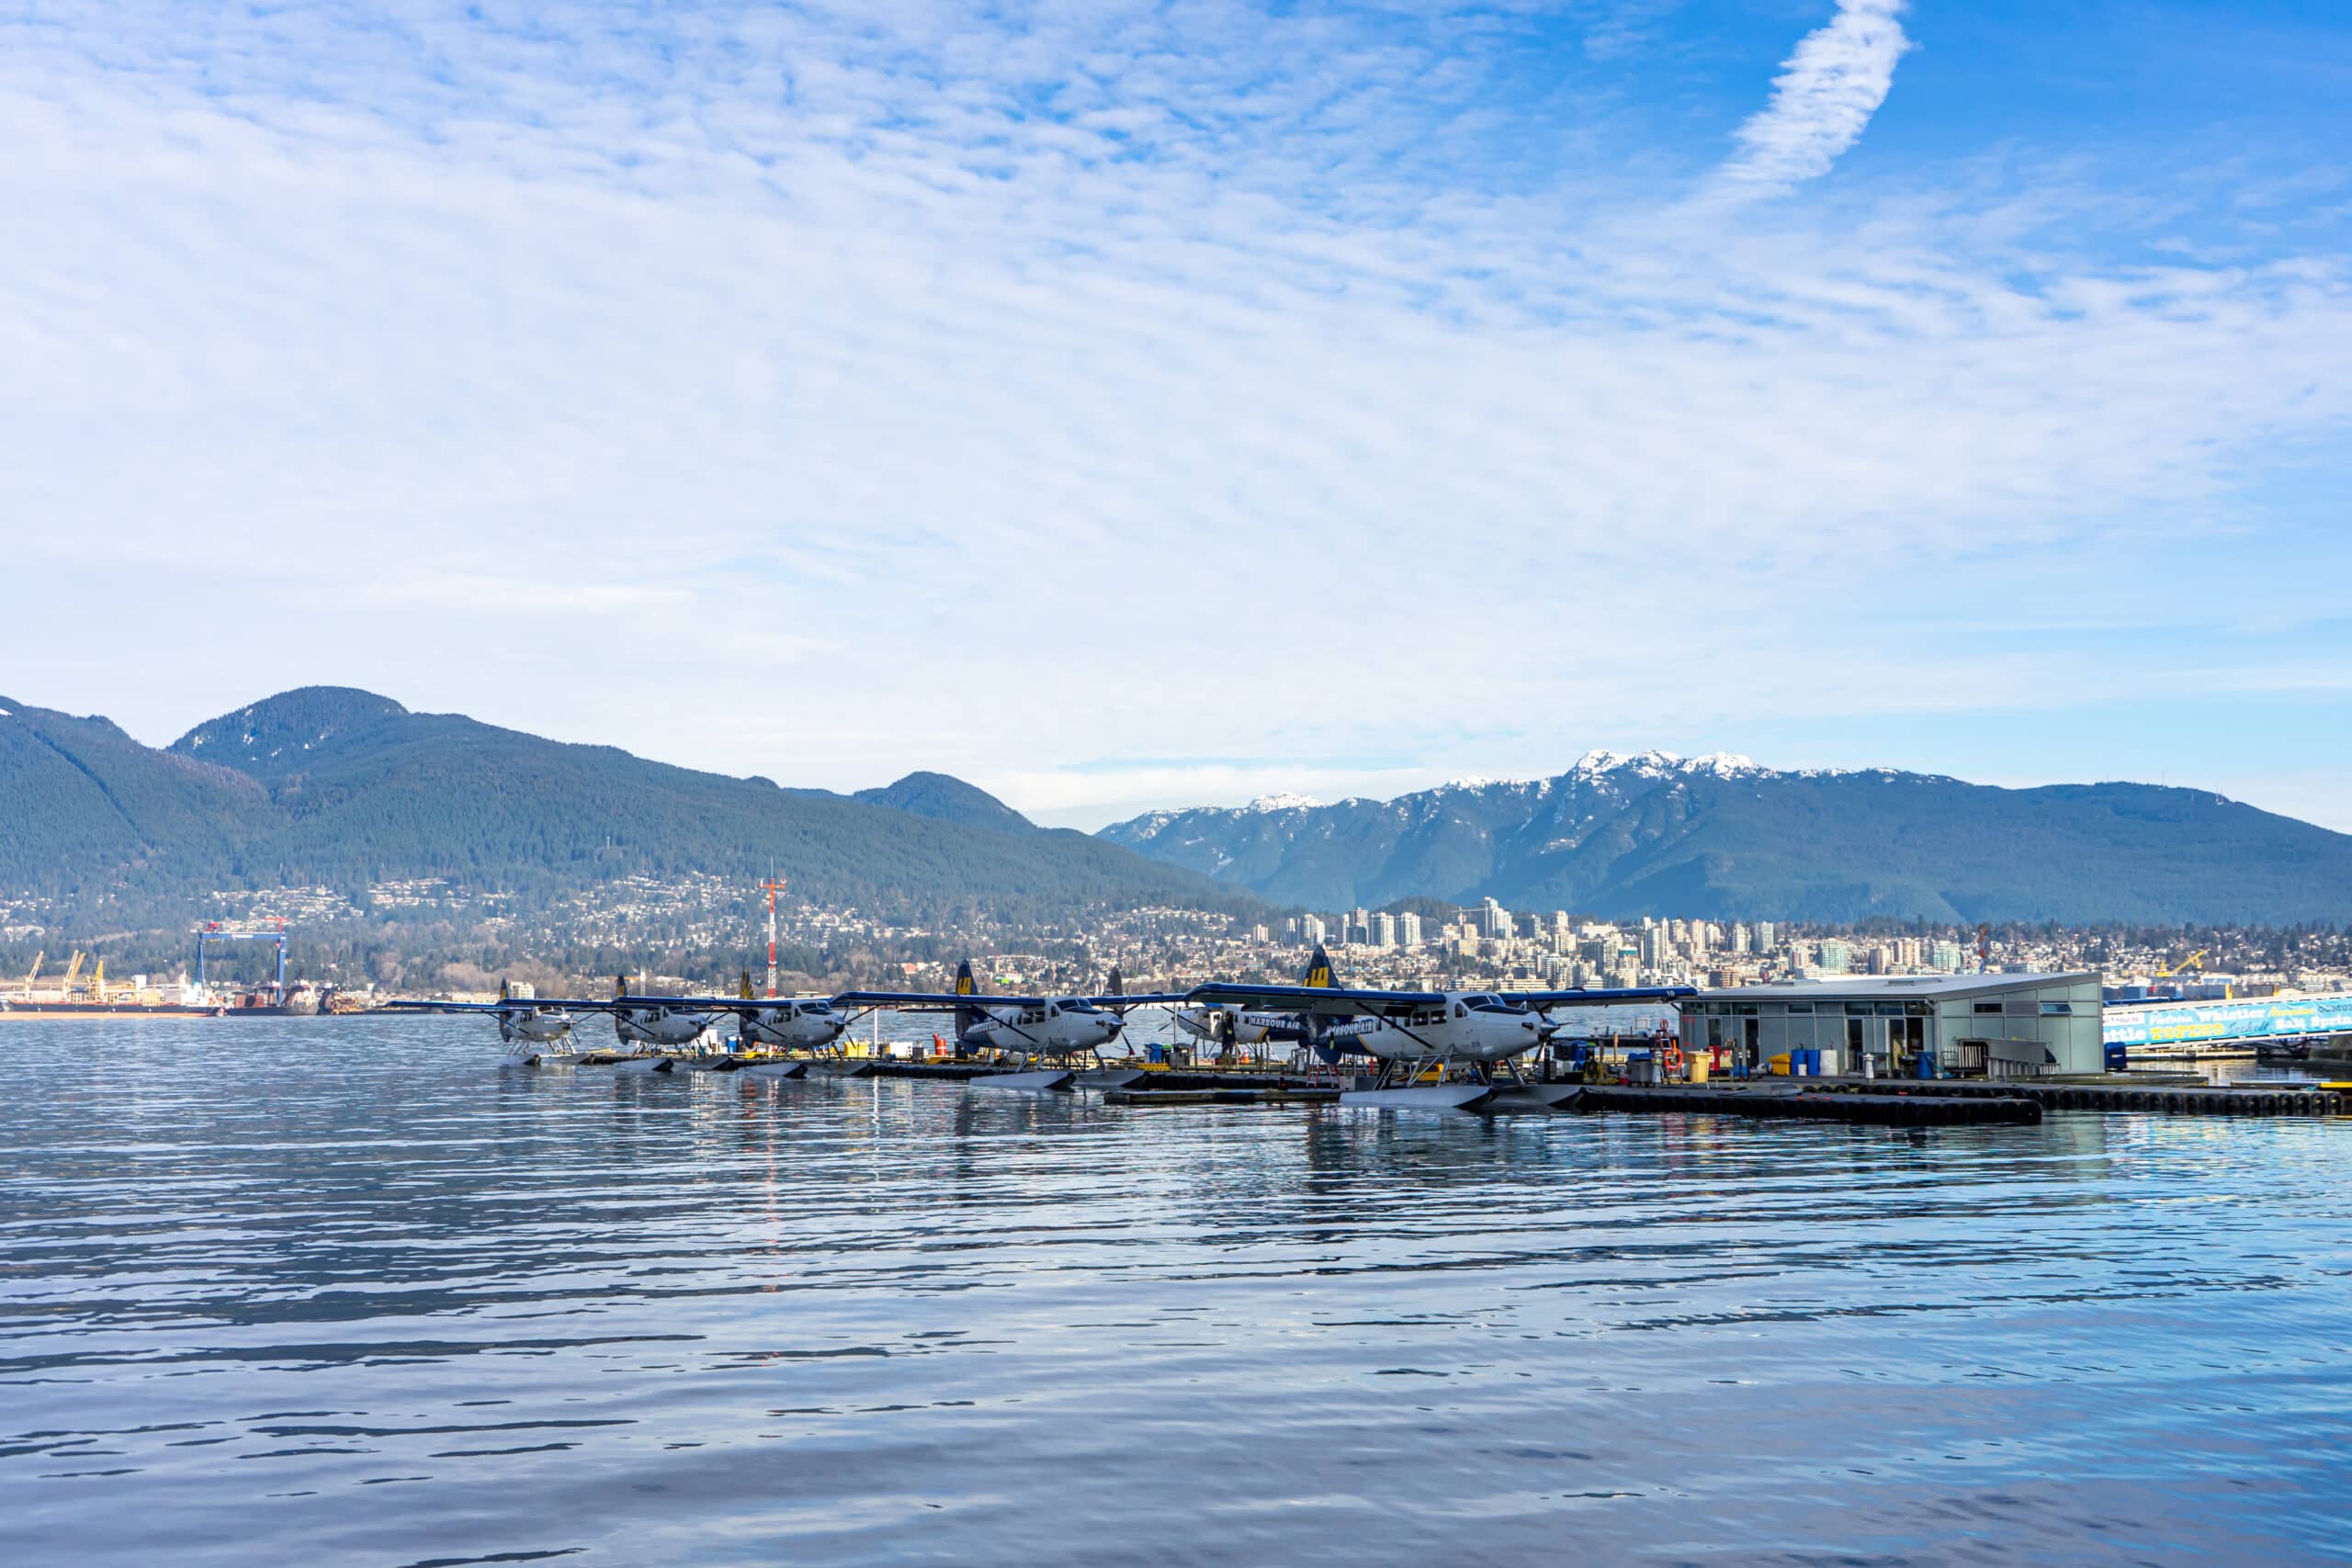 https://www.discovercanadatours.com/wp-content/uploads/2022/12/©Lisanne_Smeele_Vancouver_Harbour_Air-scaled.jpg